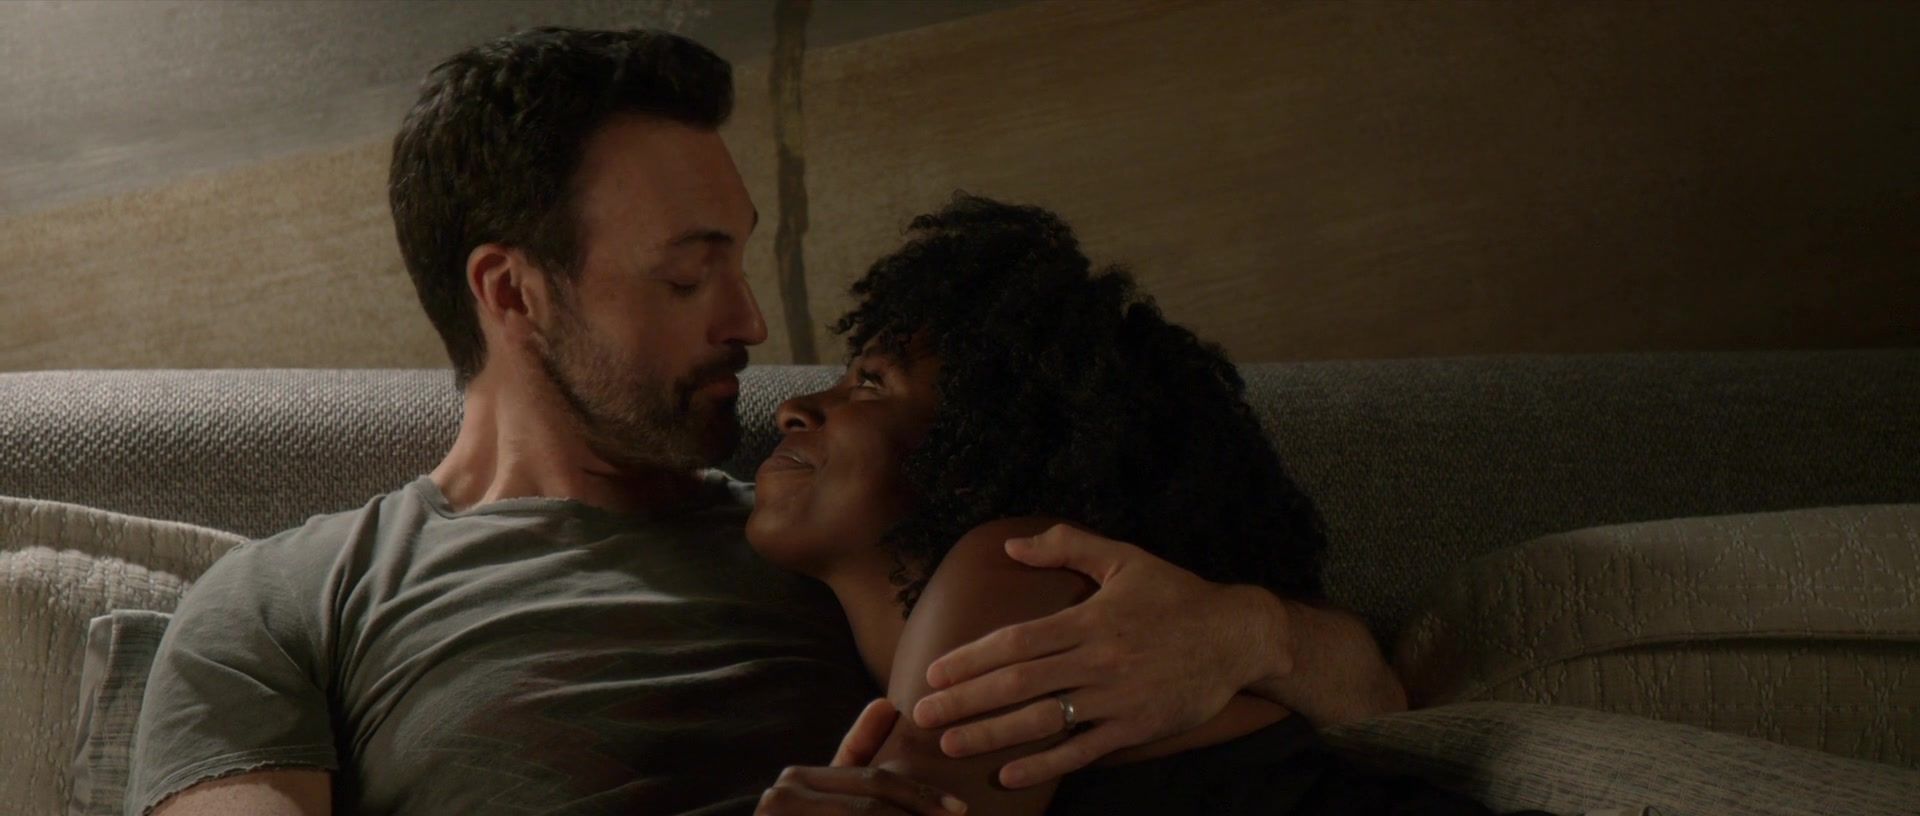 Jacking Kirby Howell-Baptiste nude - Why Women Kill s01e01 (2019) Everything To Do ...